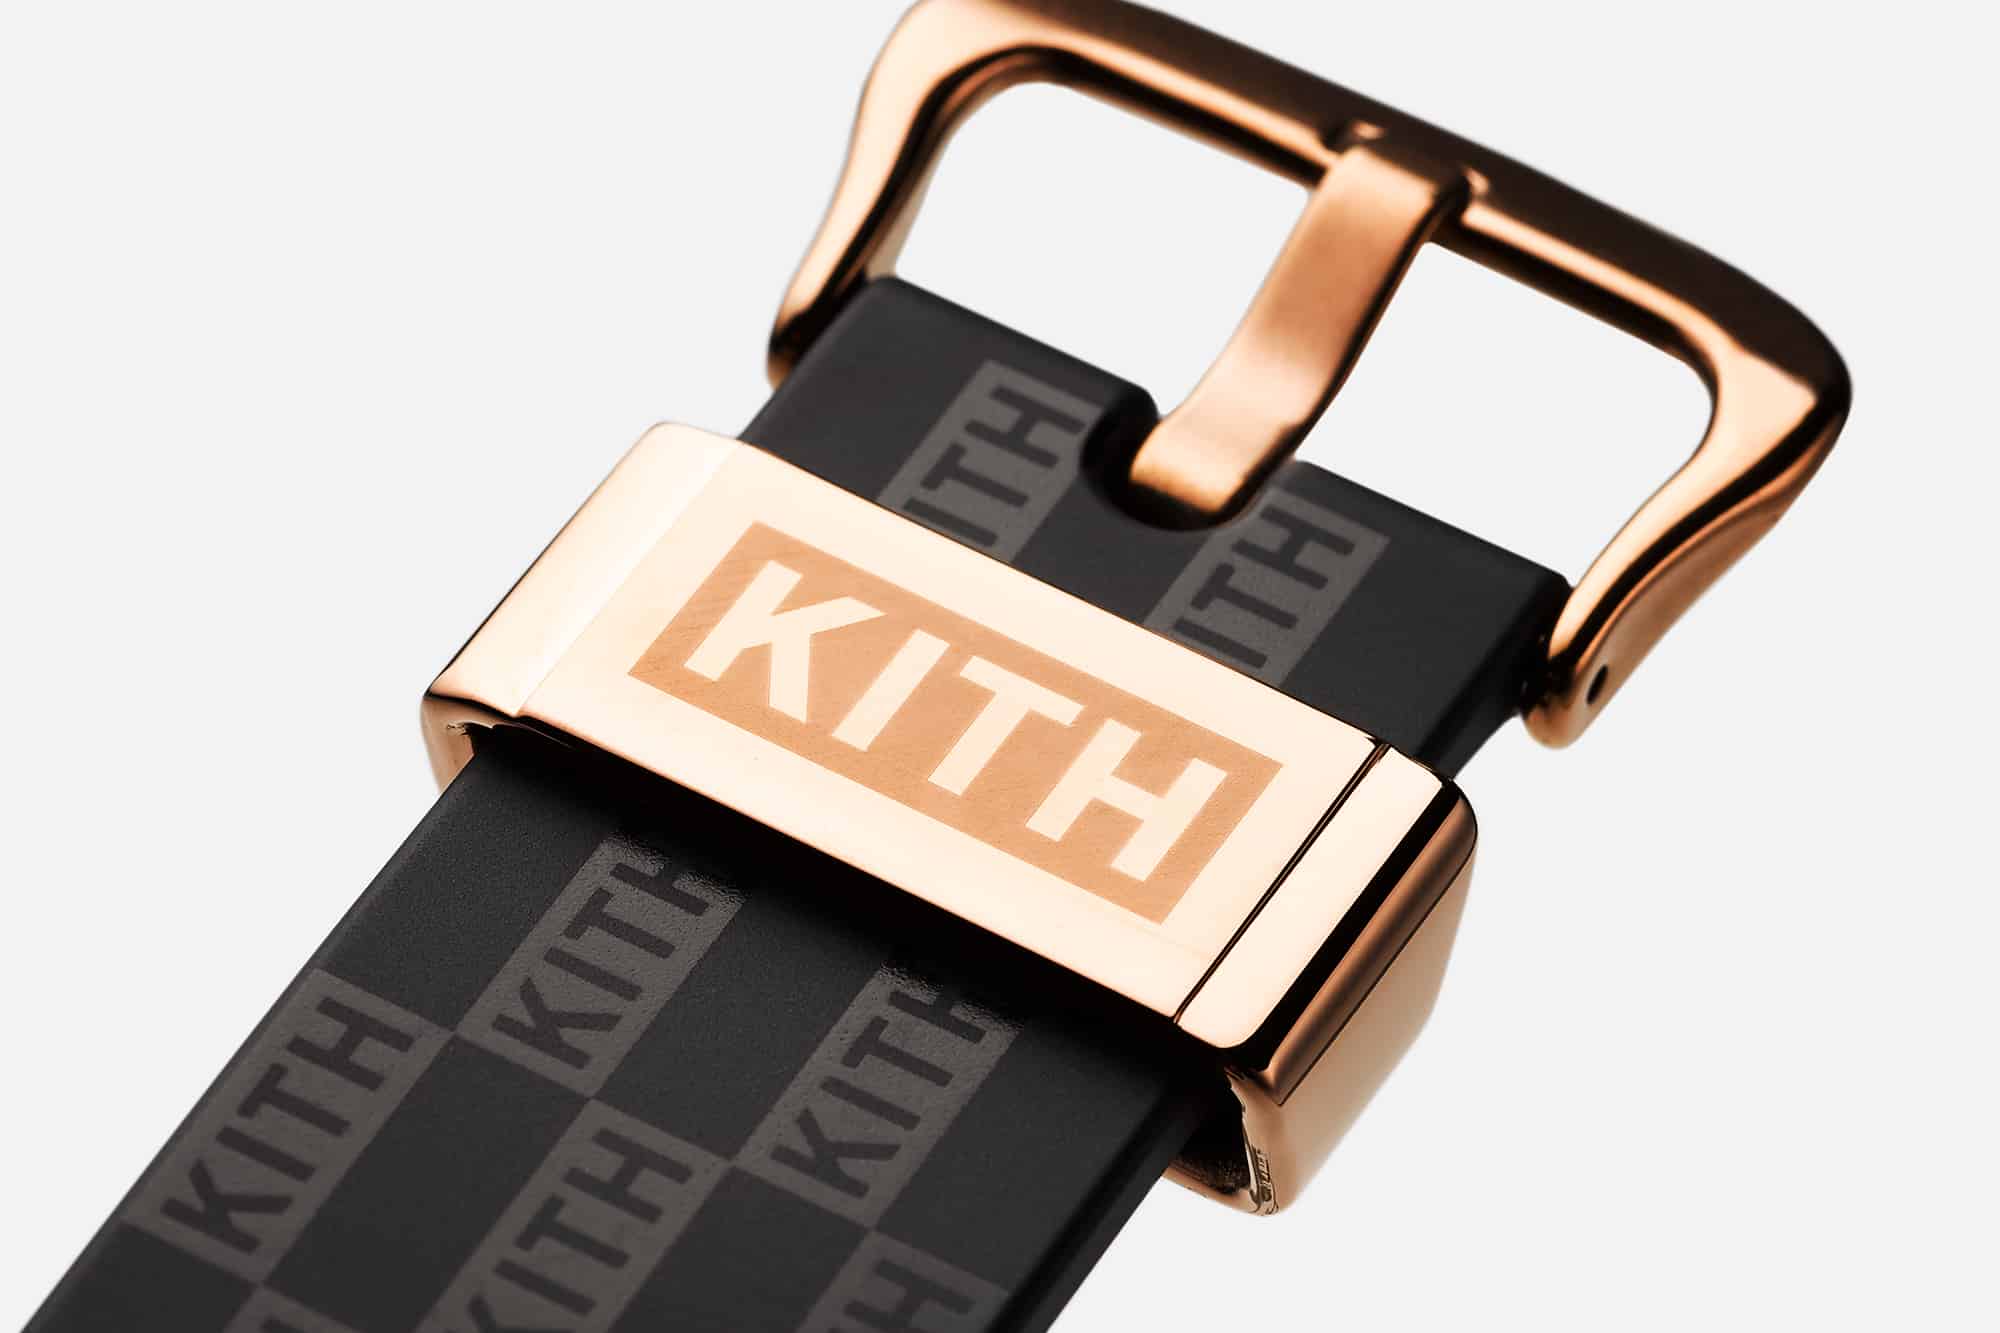 Kith and G-Shock Collaborate Once Again, Bringing You a Rose Gold